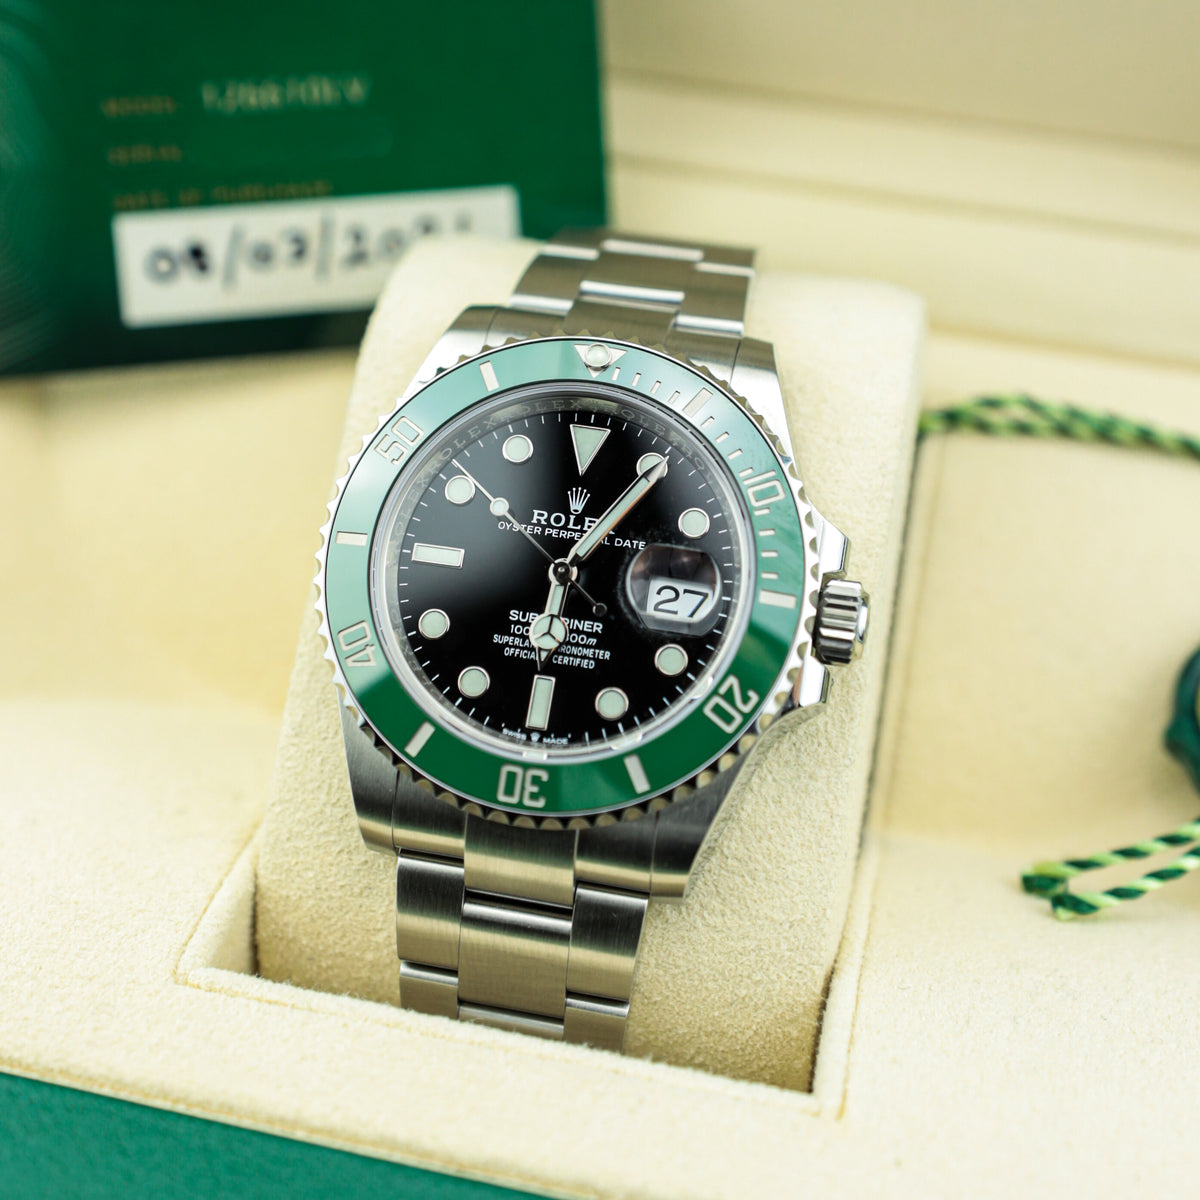 Rolex Submariner in Oystersteel, M126610LV-0002 – Long's Jewelers